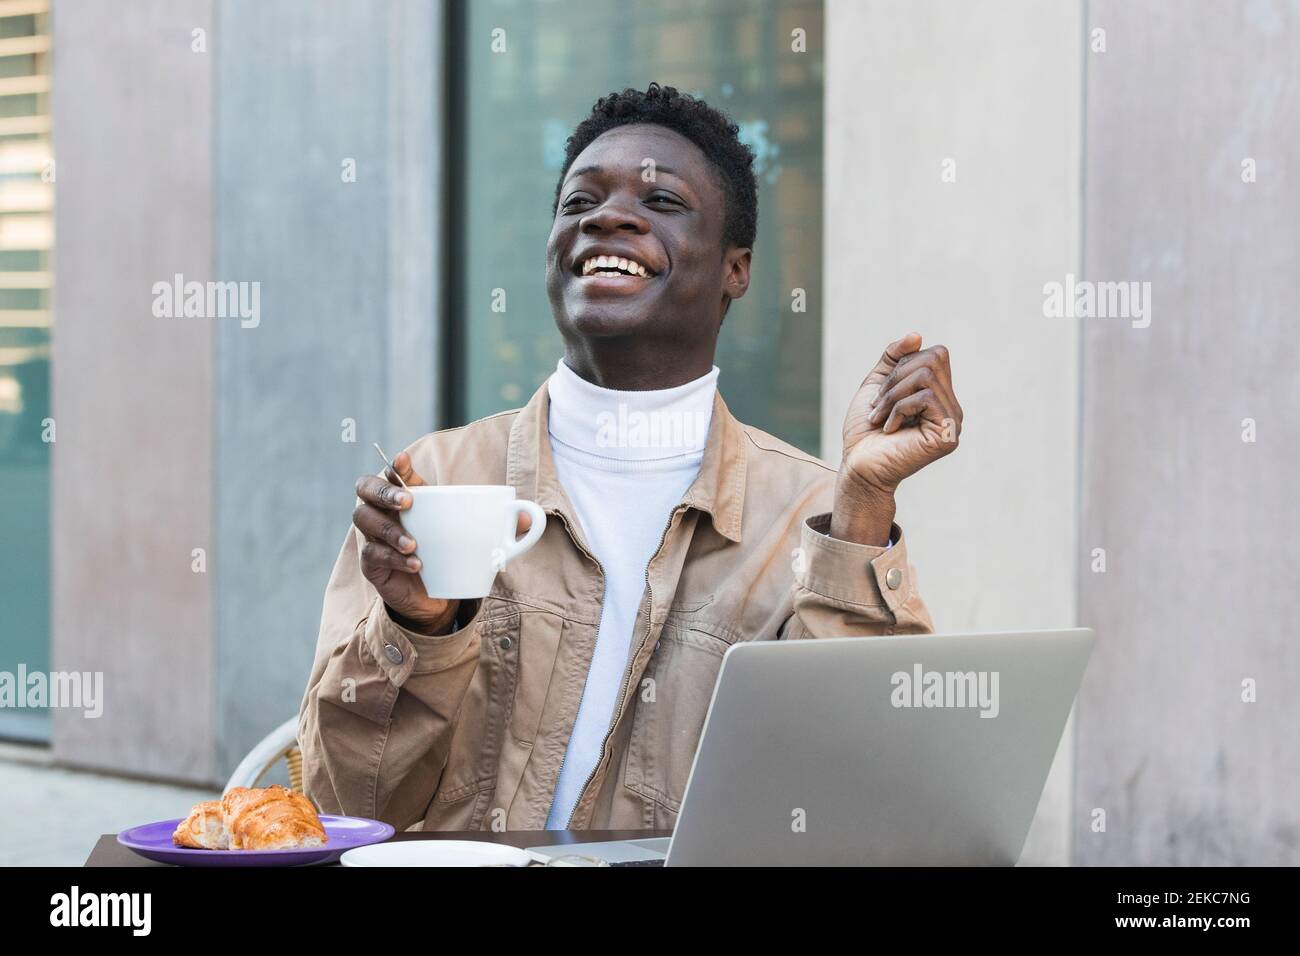 Happy African man with laptop holding coffee cup at sidewalk cafe Stock Photo